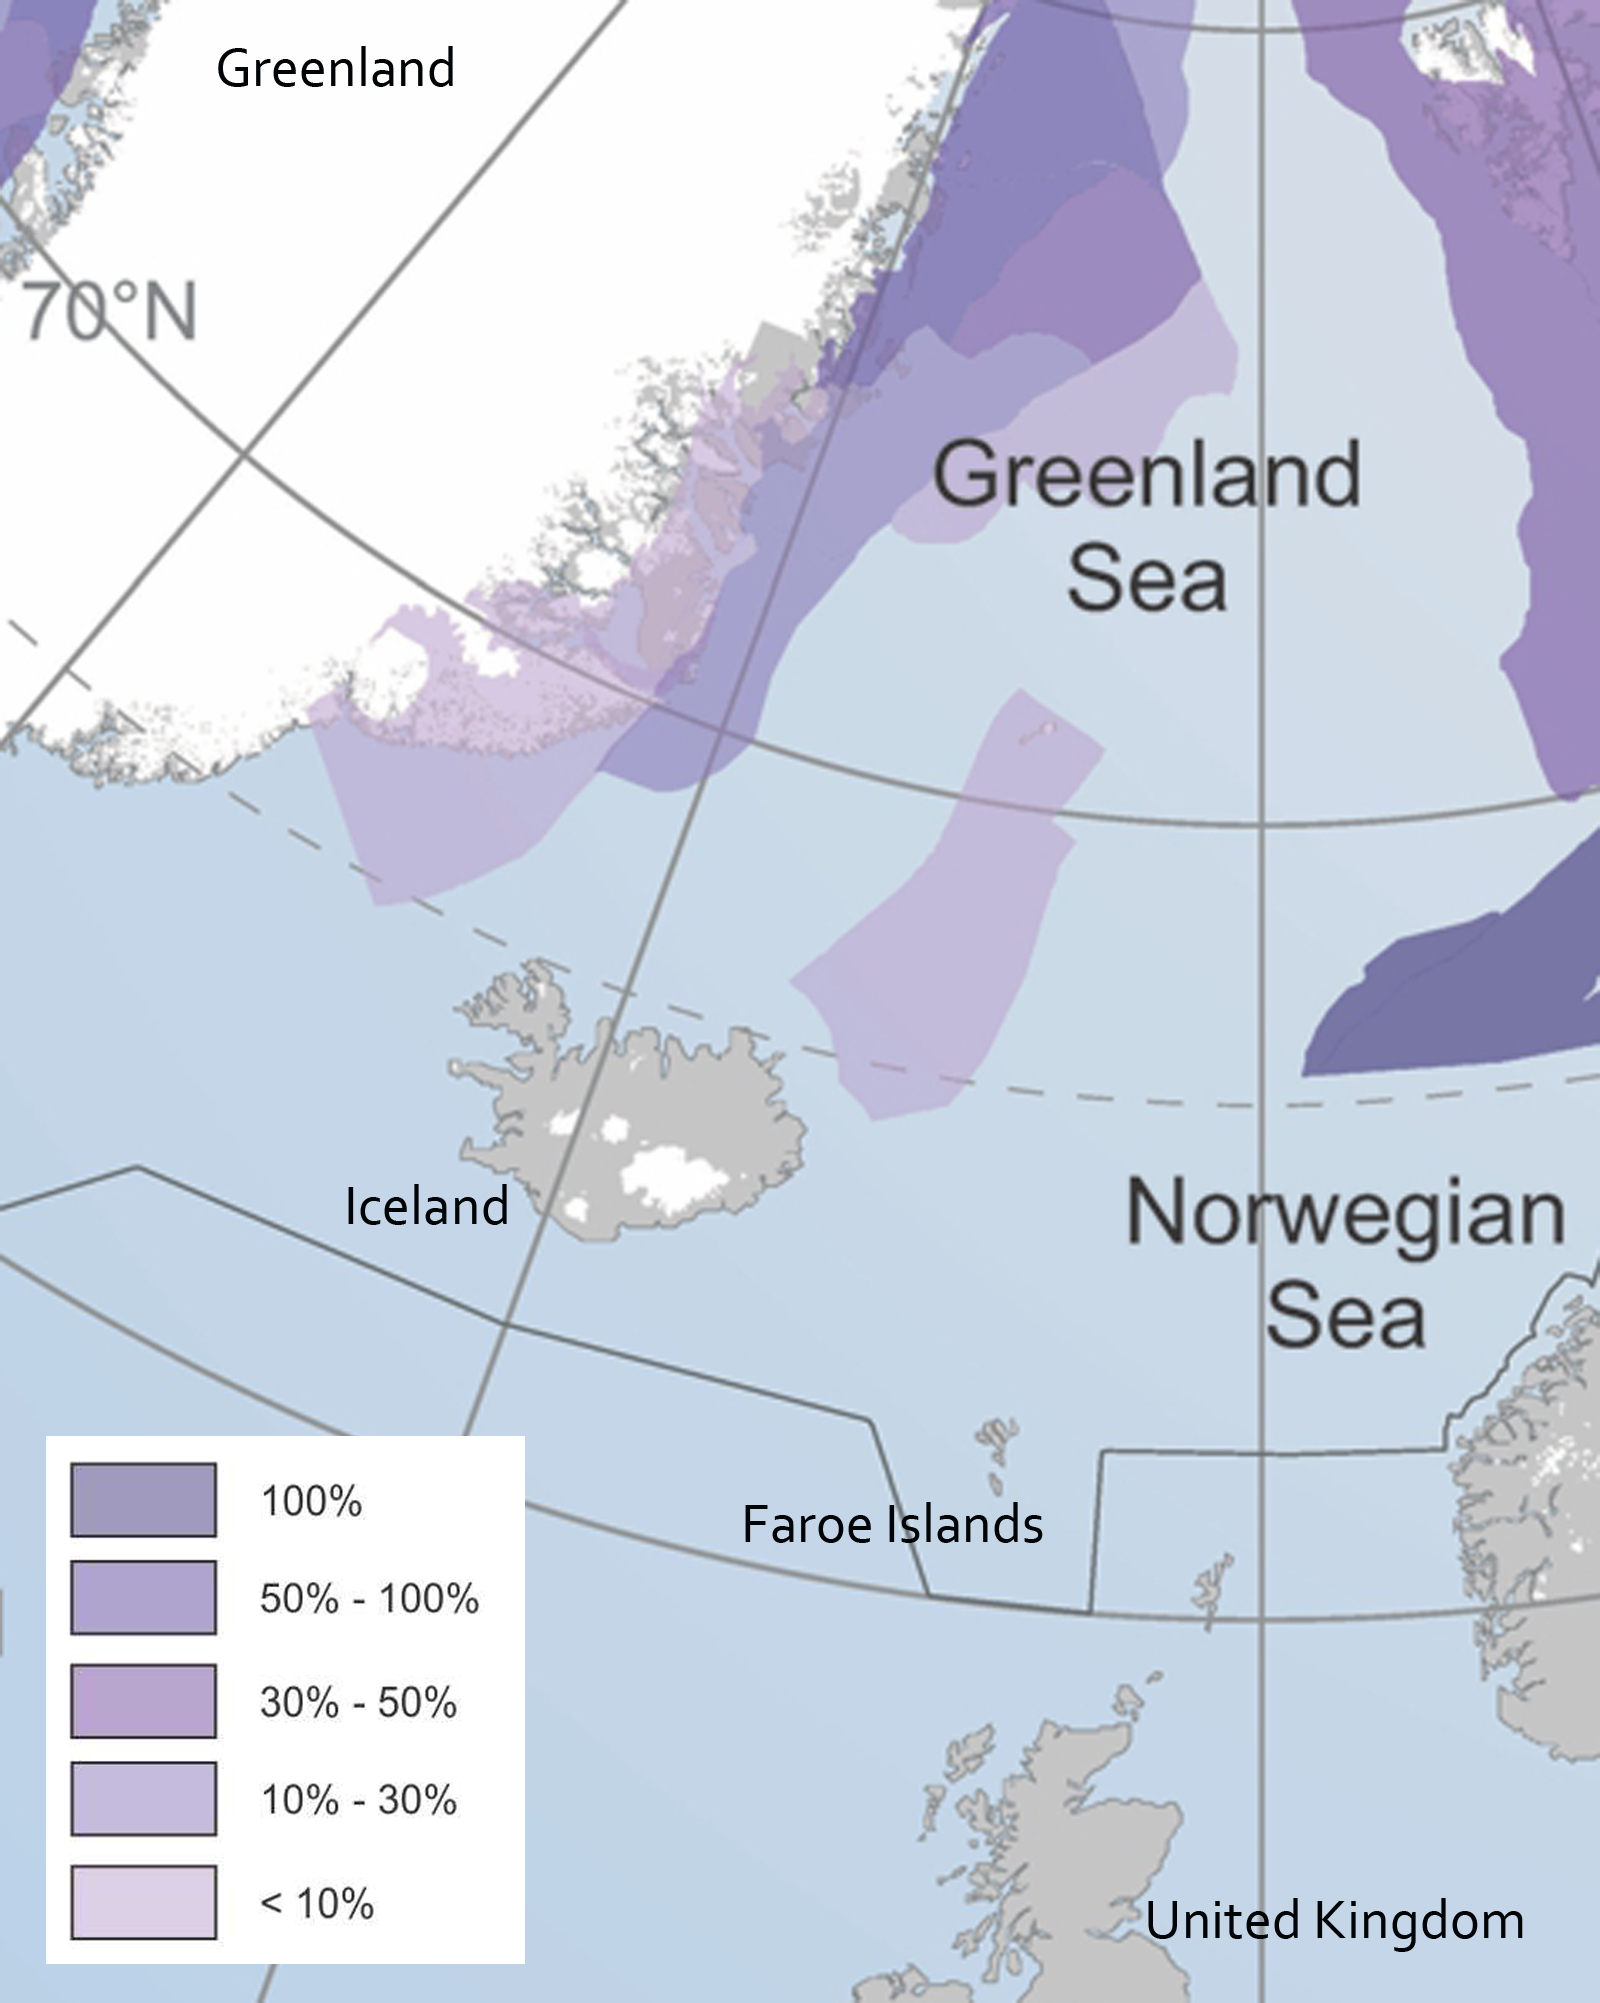 Oil in the southern part of the Arctic